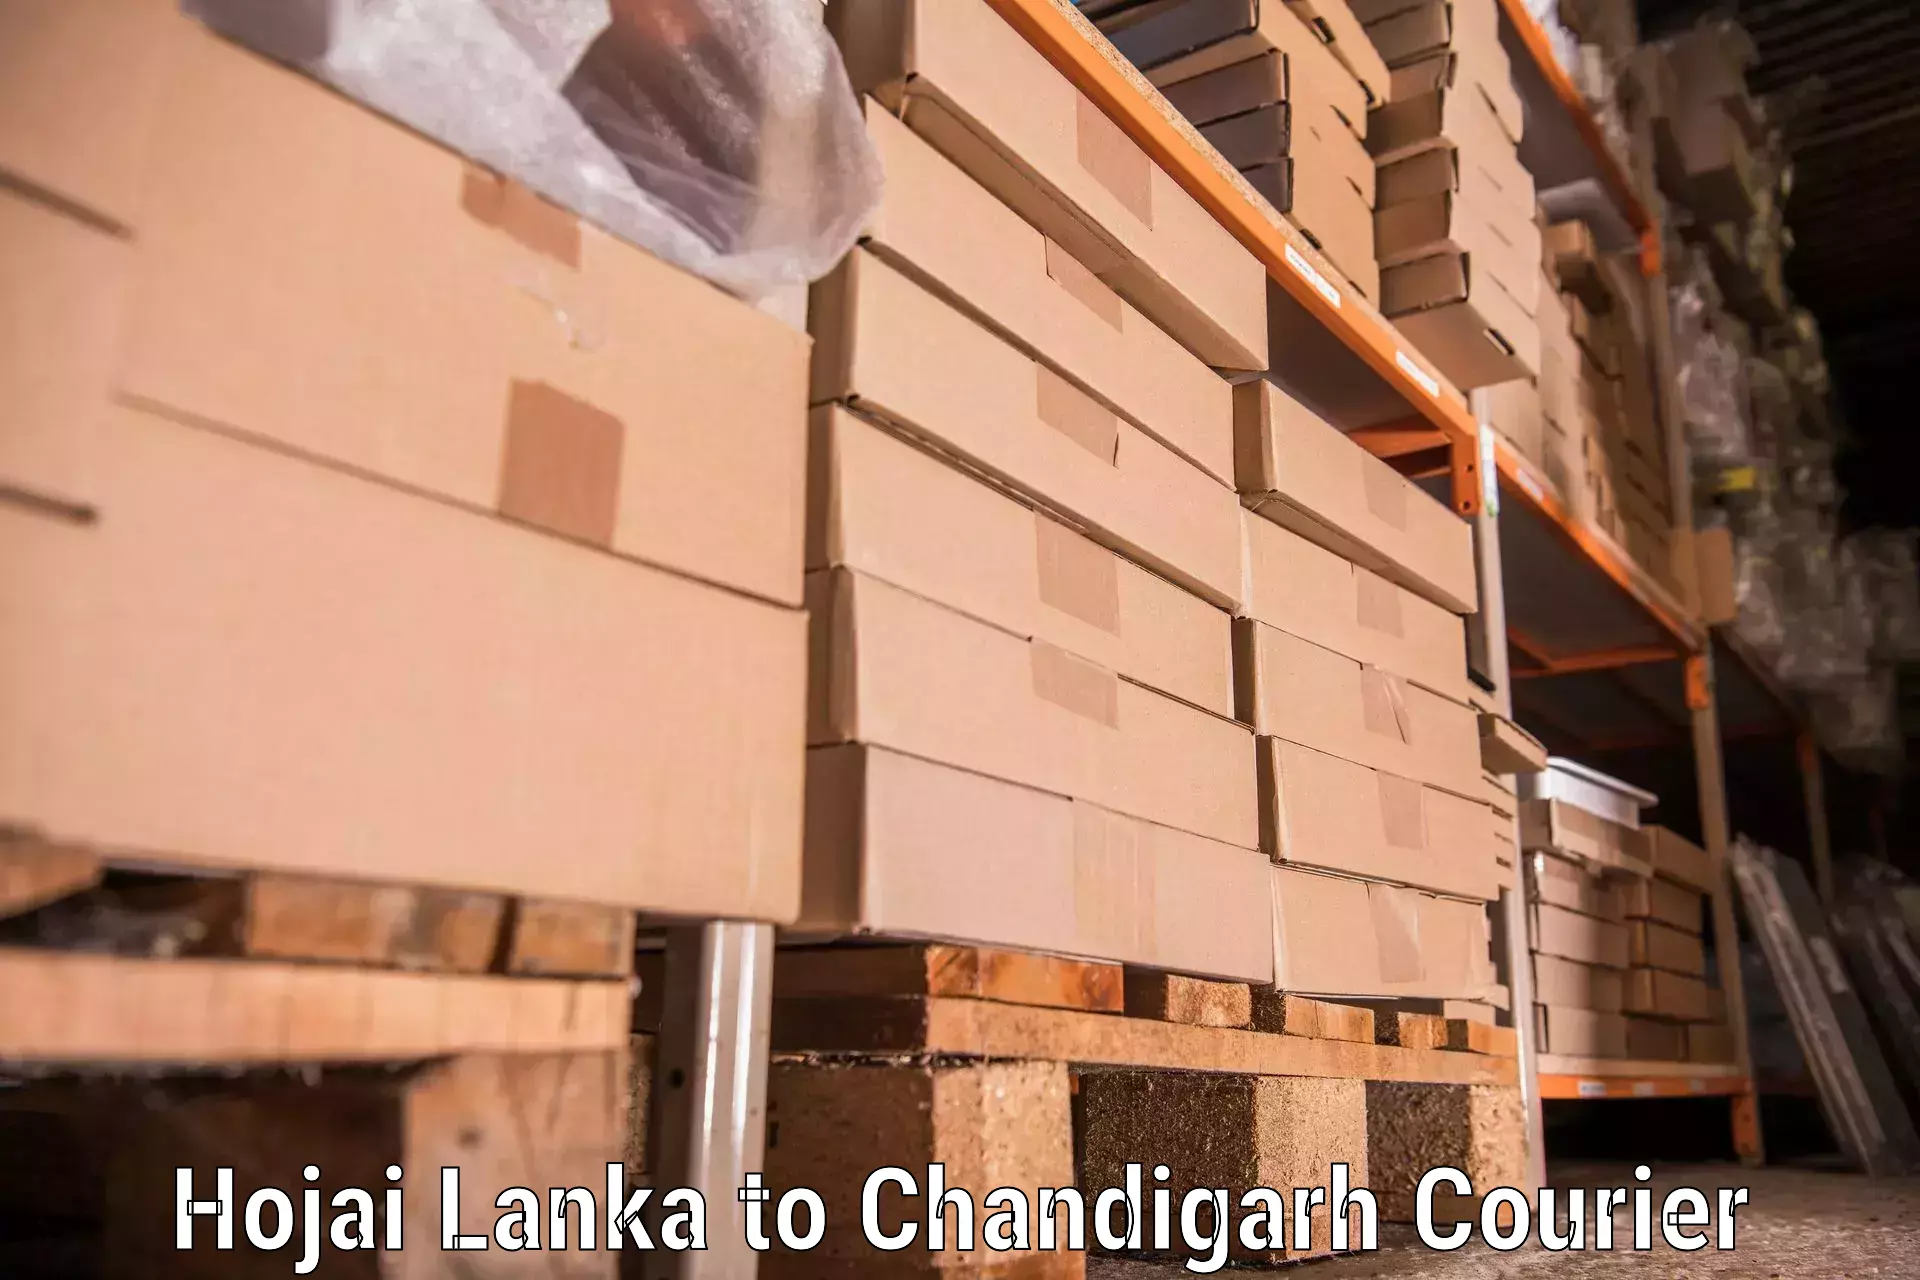 Home moving experts in Hojai Lanka to Chandigarh